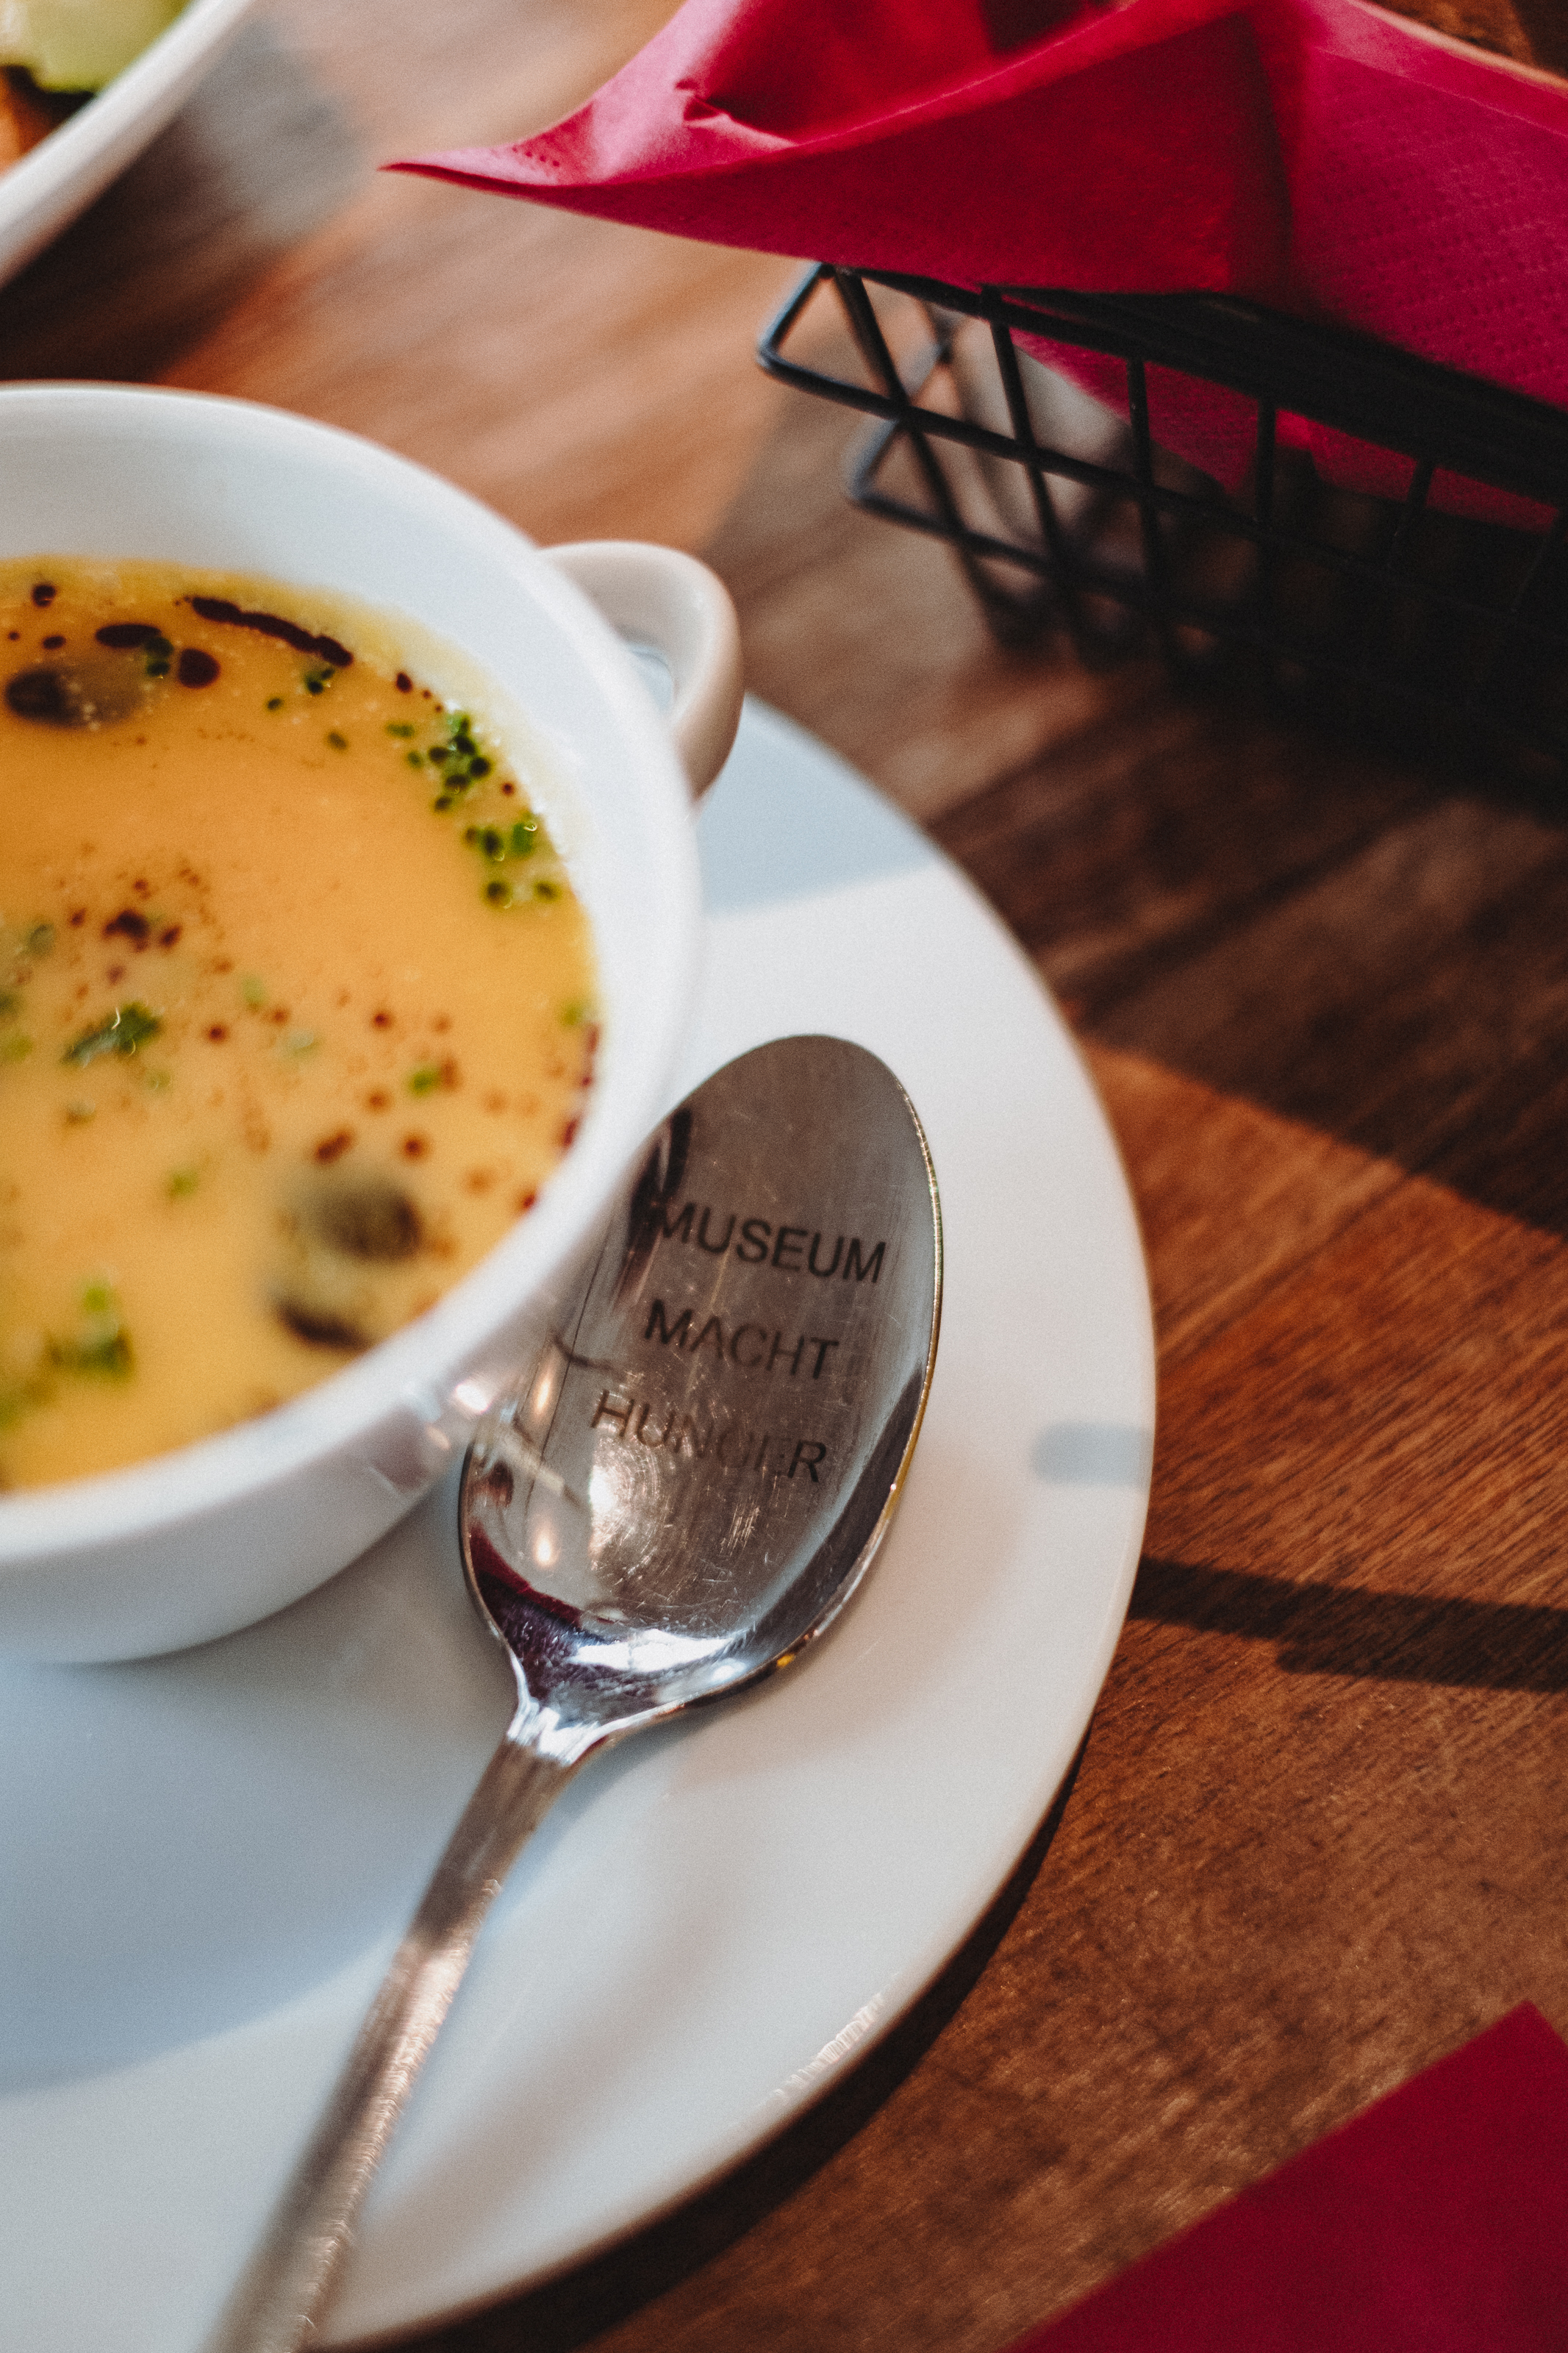 There is a plate of soup on a table. Next to it is a spoon with the words "Museum makes you hungry". - enlarged view